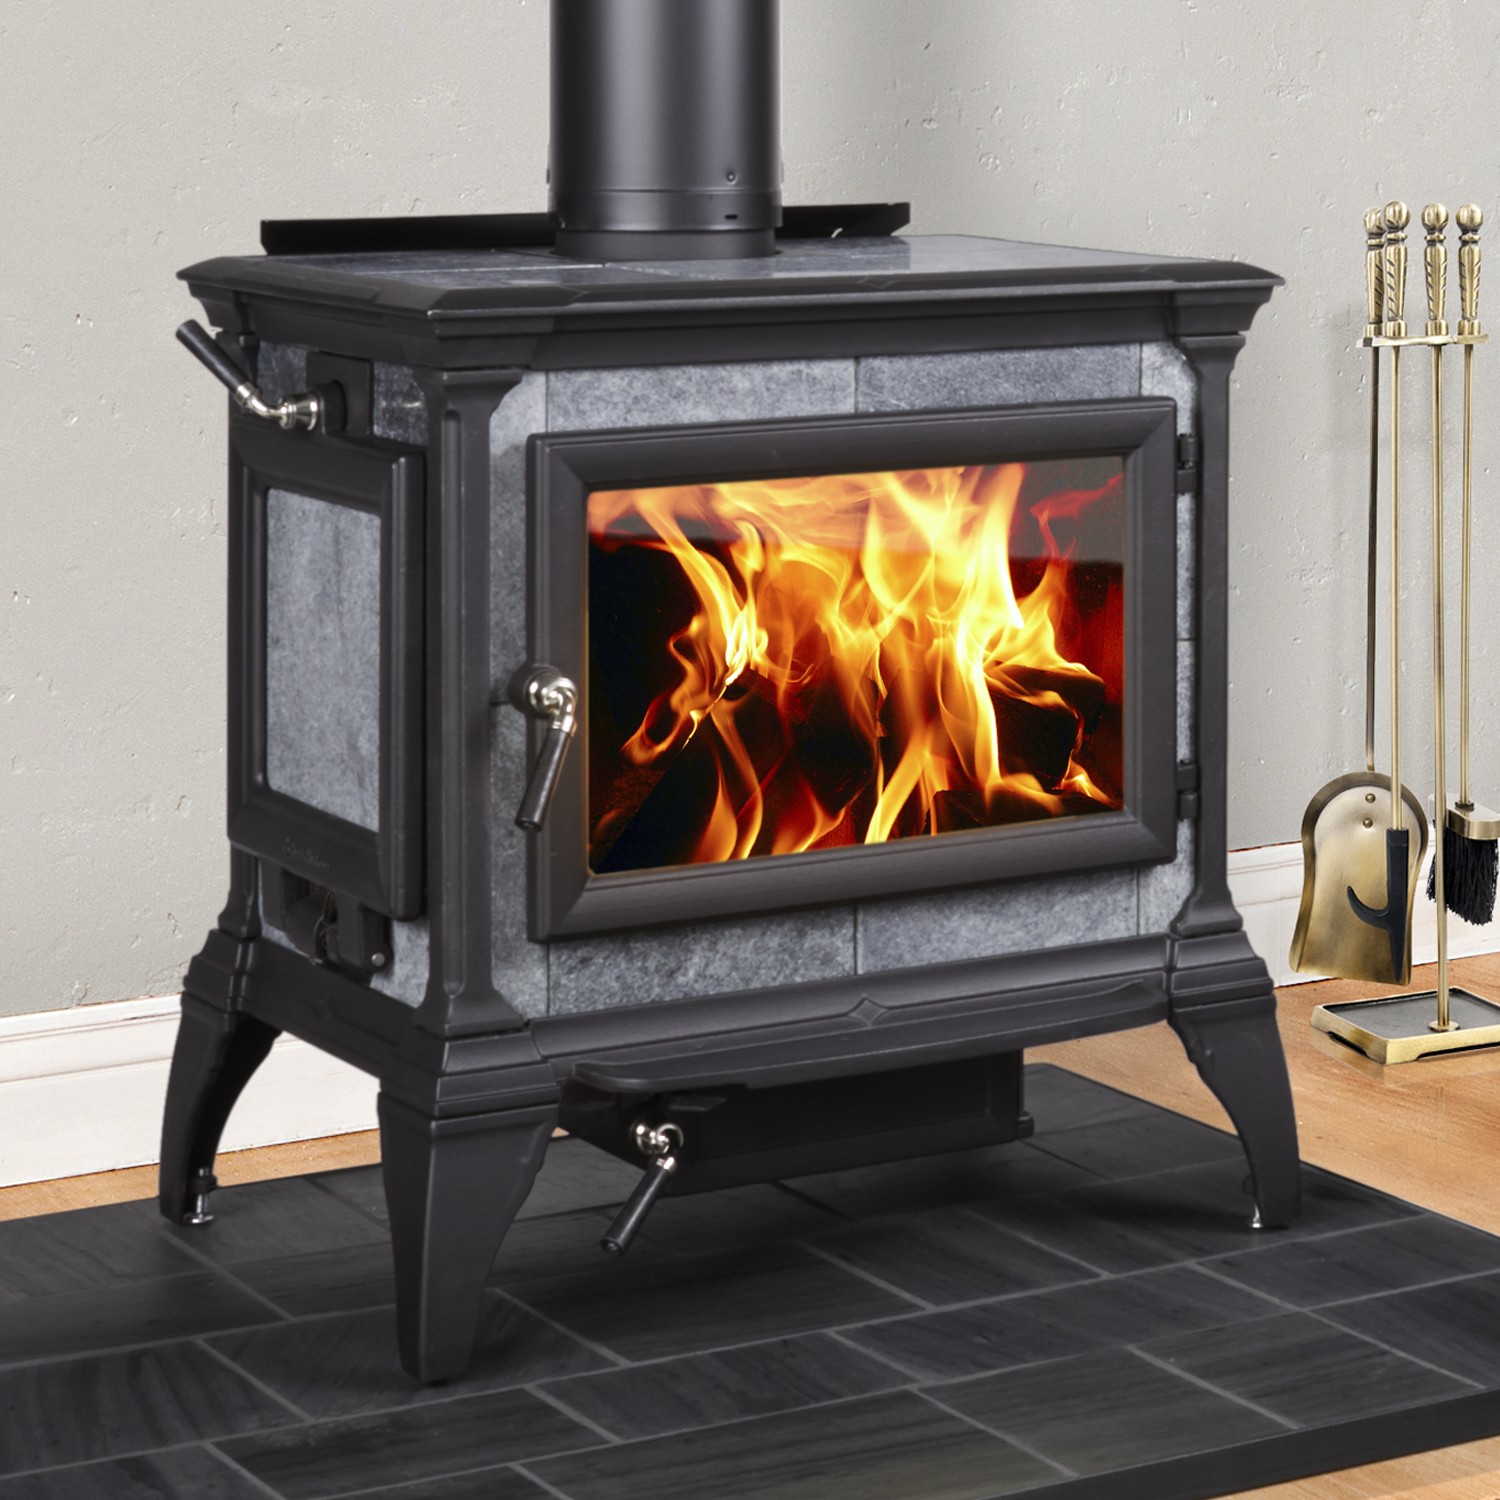 Hearthstone Wood Stoves - Review And Soapstone Options